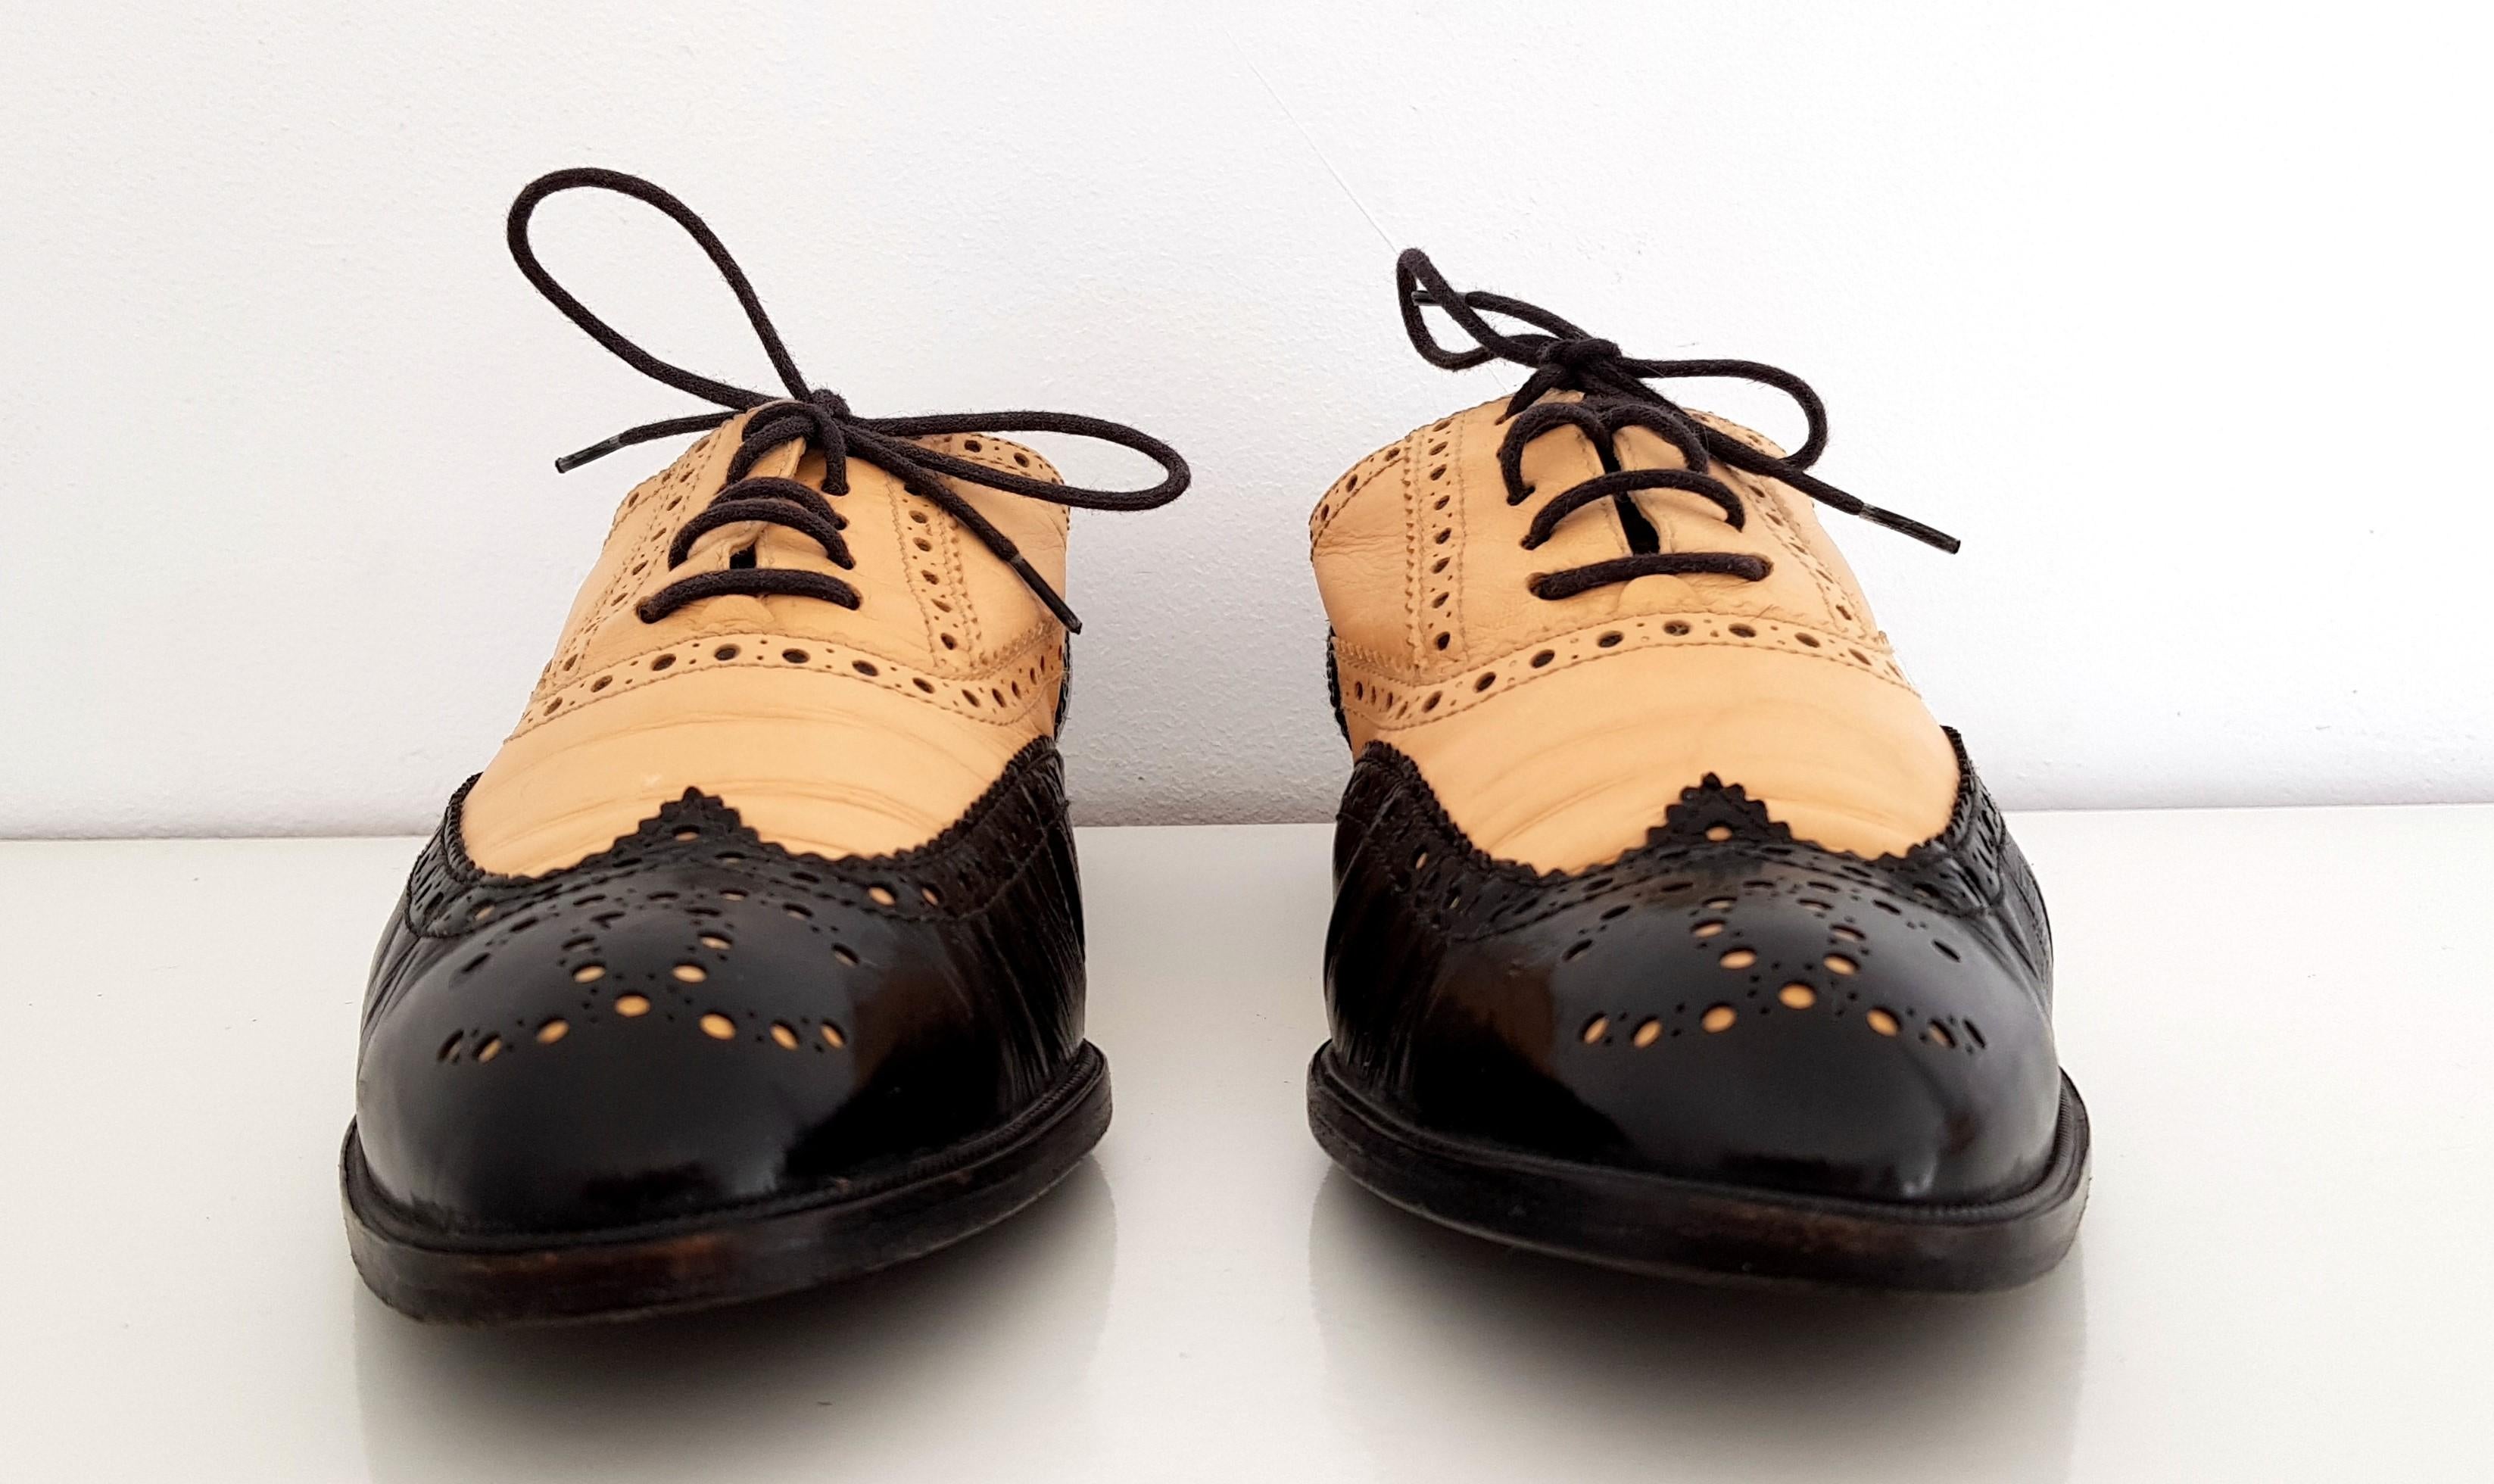 Chanel Bicolor Leather Lace-up Oxford Shoes
Colors: Beige and Black
Materials: Leather
Conditions: Great conditions, worn very few times and with only light signs of use in the interior sole. Like new.
Size 40 (EU)
Length: 27,5 cm
Width: 9 cm
Heel